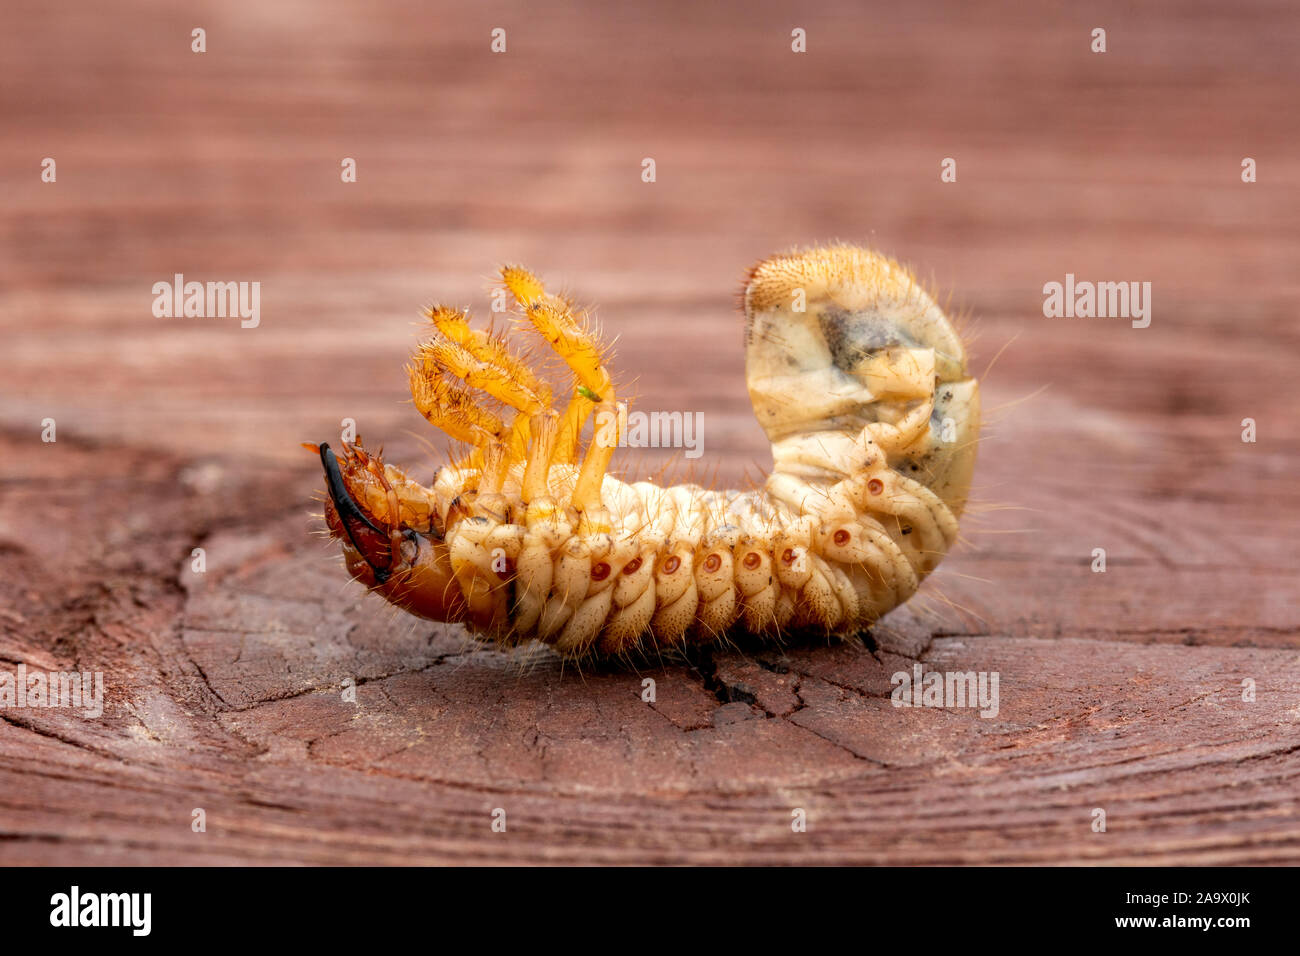 Dead larva of the May beetle Common Cockchafer or May Bug (Melolontha melolontha). Grubs are important pest of plants. Stock Photo